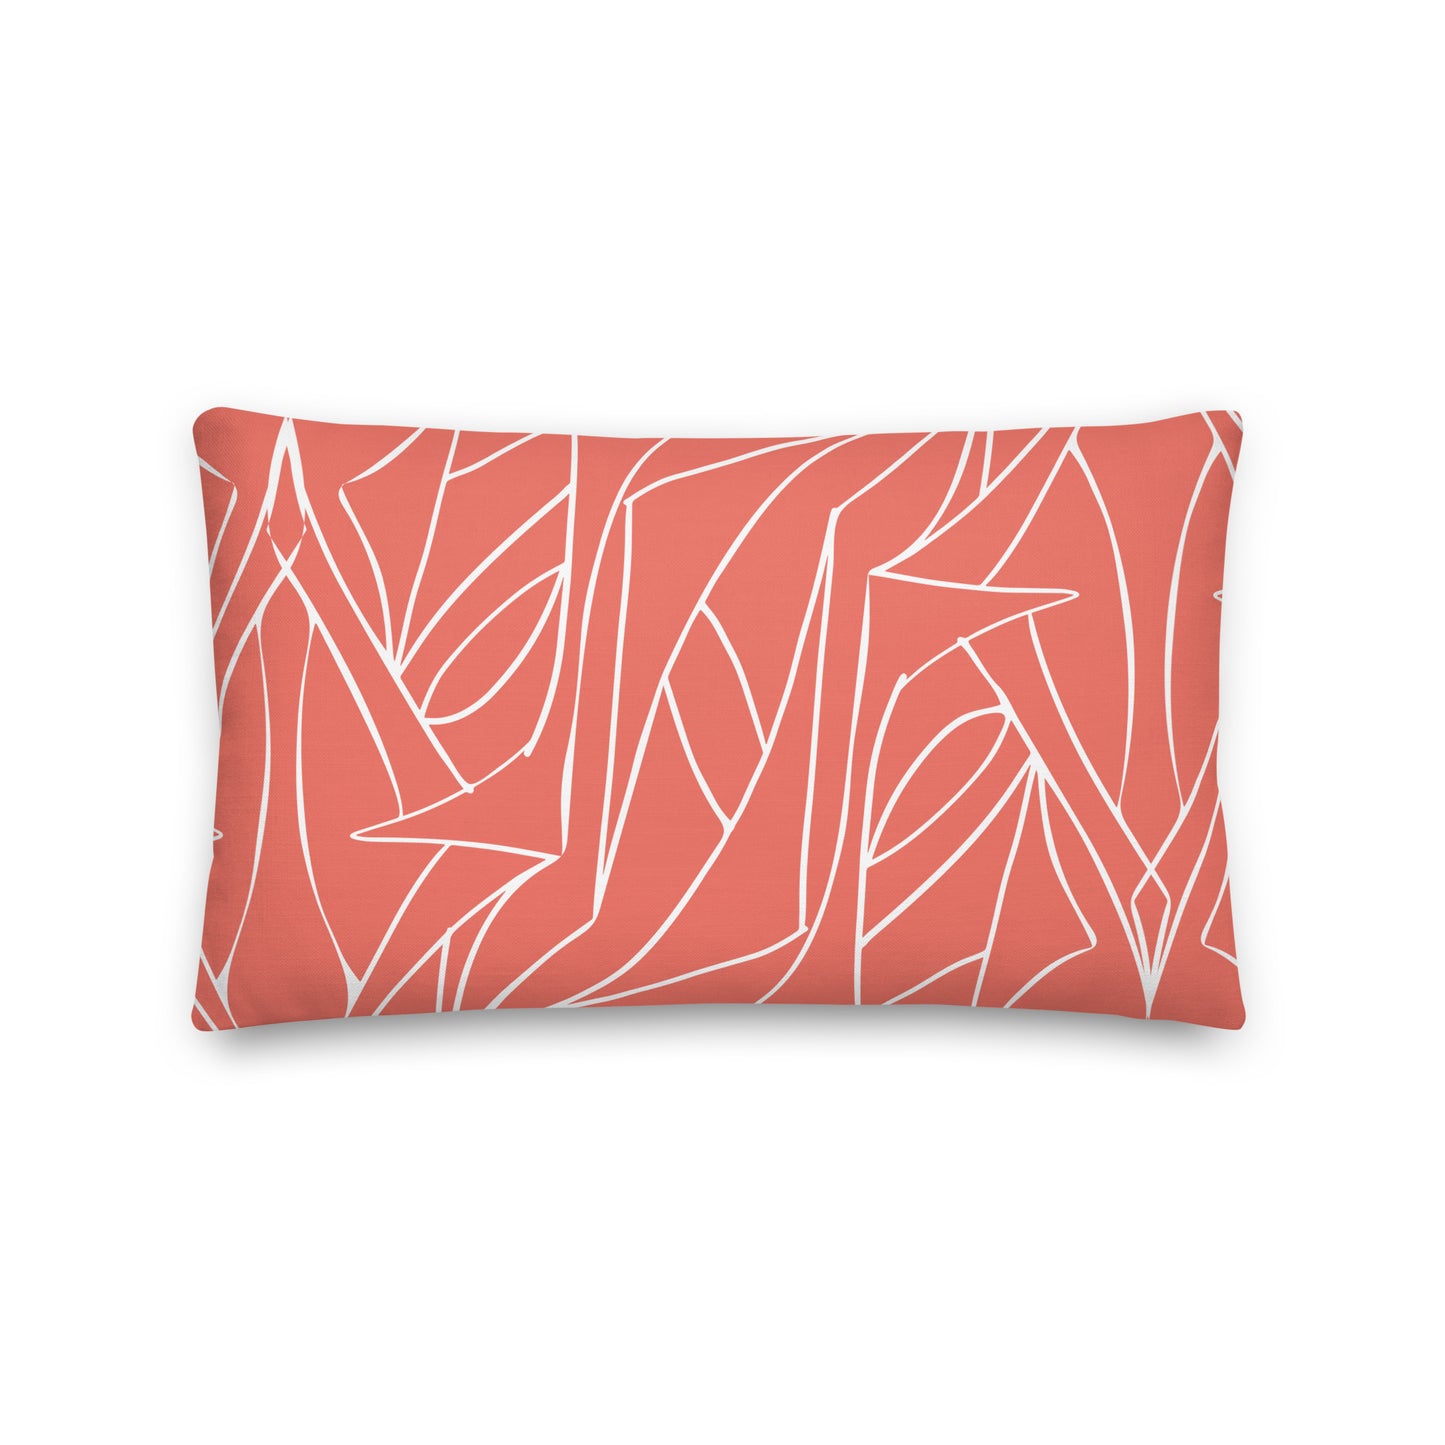 linear patterned pillow peachy